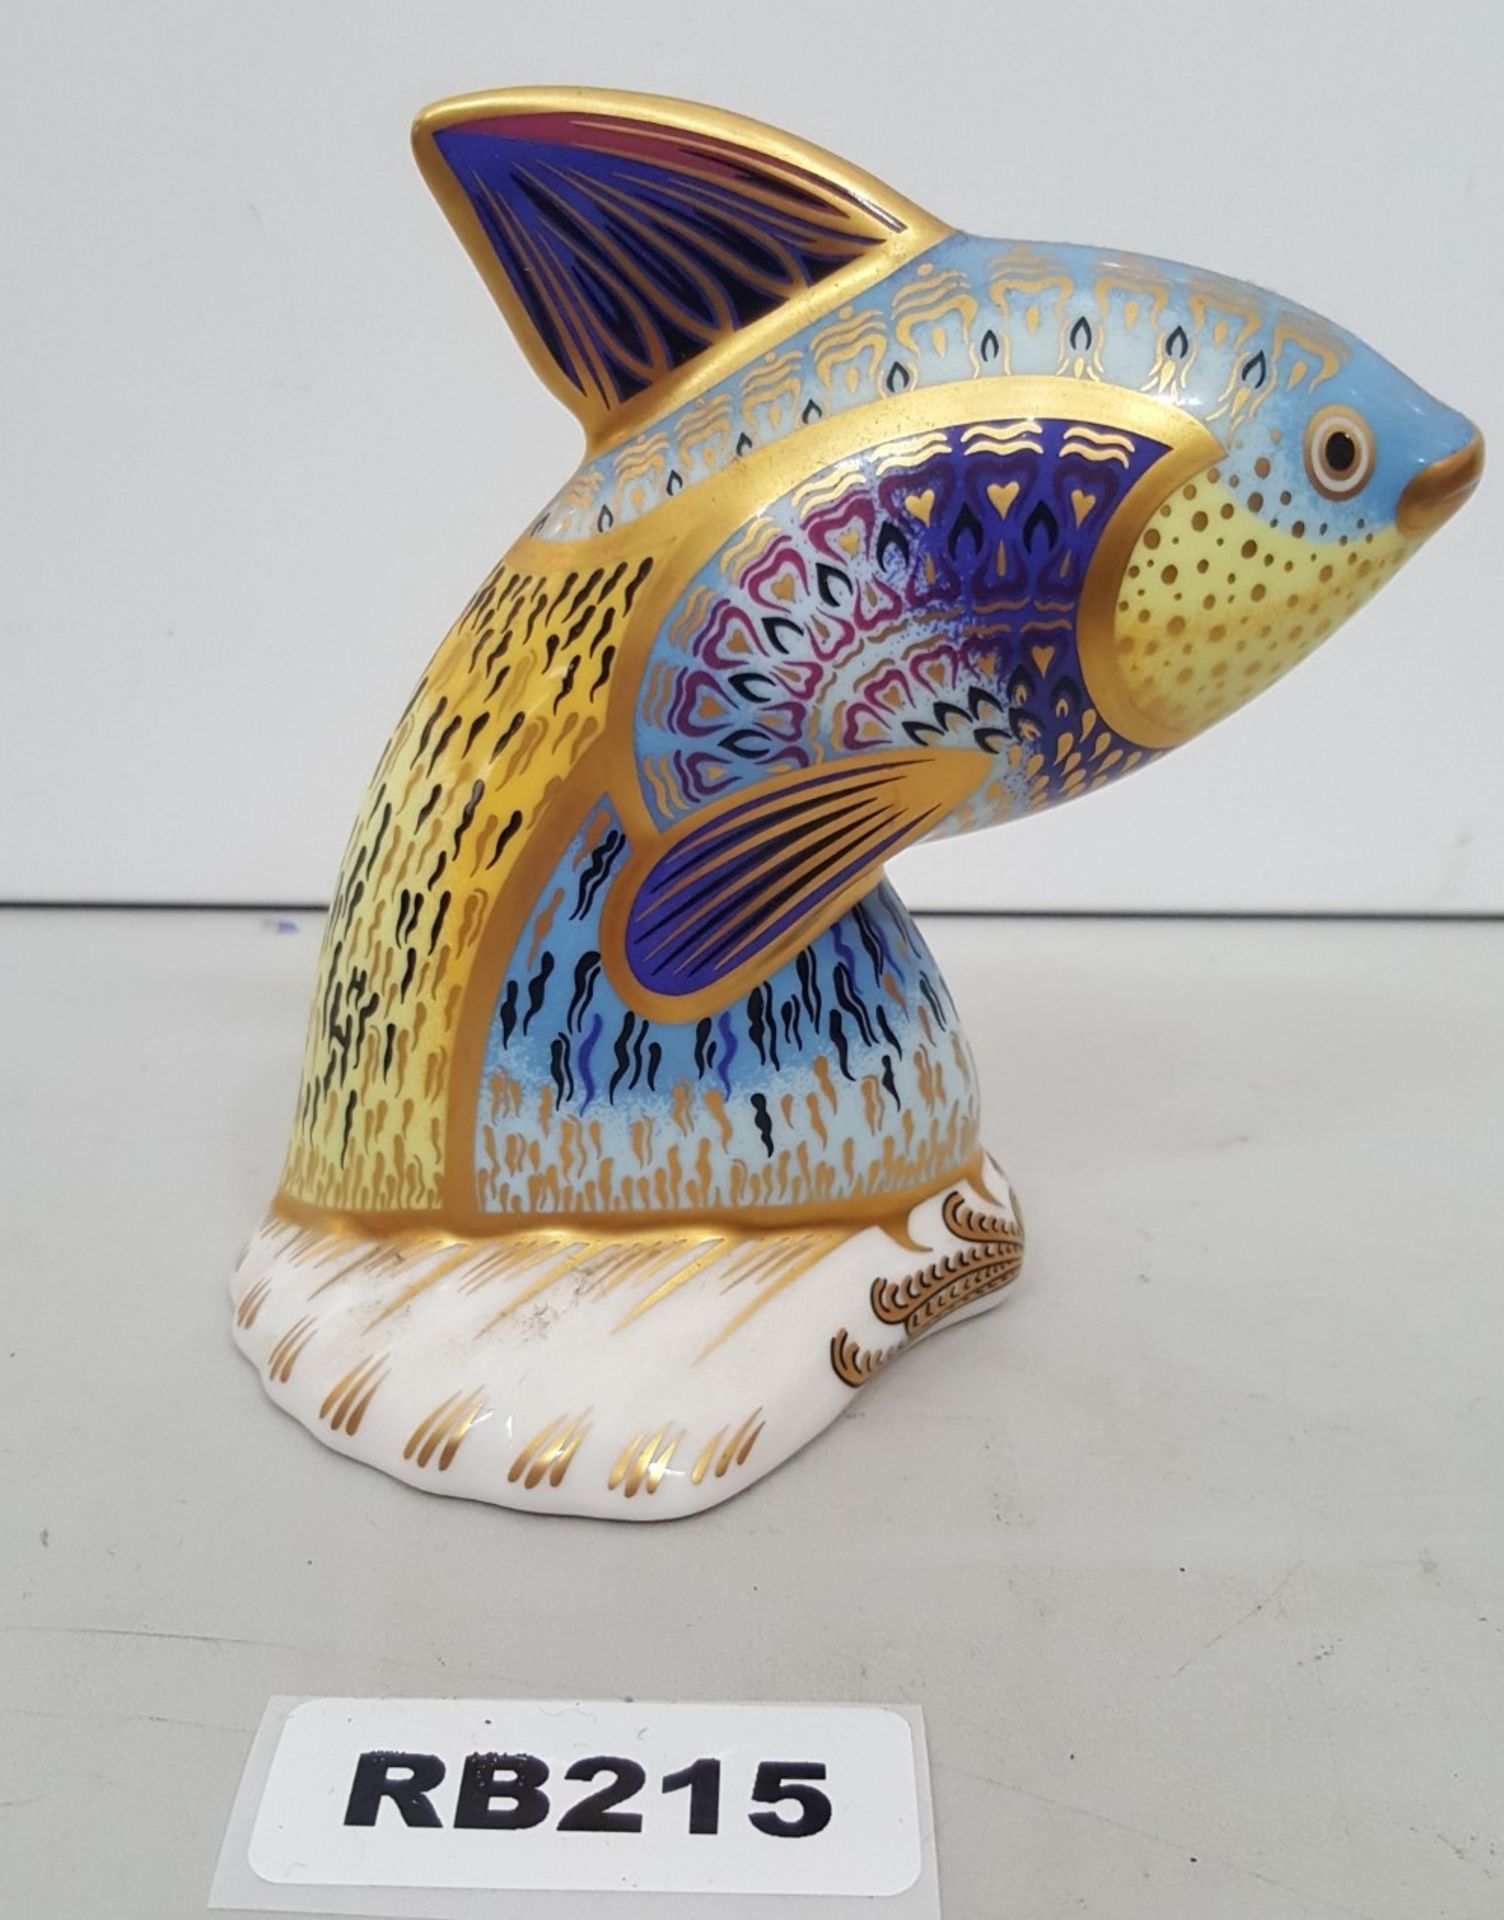 1 x COLLECTIBLE ROYAL CROWN DERBY GUPPY FISH LIMITED EDITION FIGURINE - Ref RB215 I